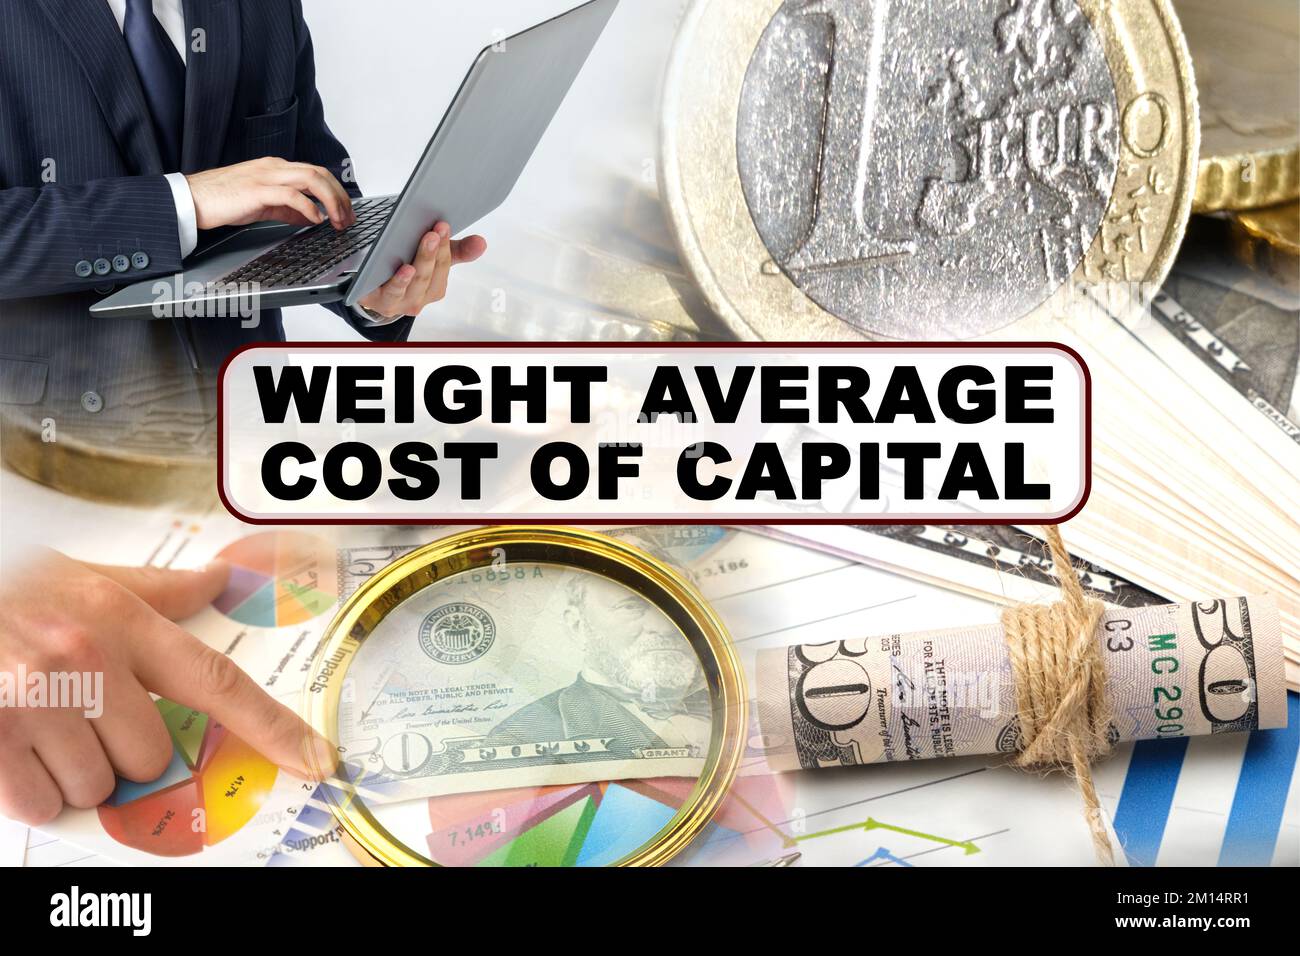 Business concept. Photo collage of photographs on financial topics, the inscription in the center - WEIGHT AVERAGE COST OF CAPITAL Stock Photo